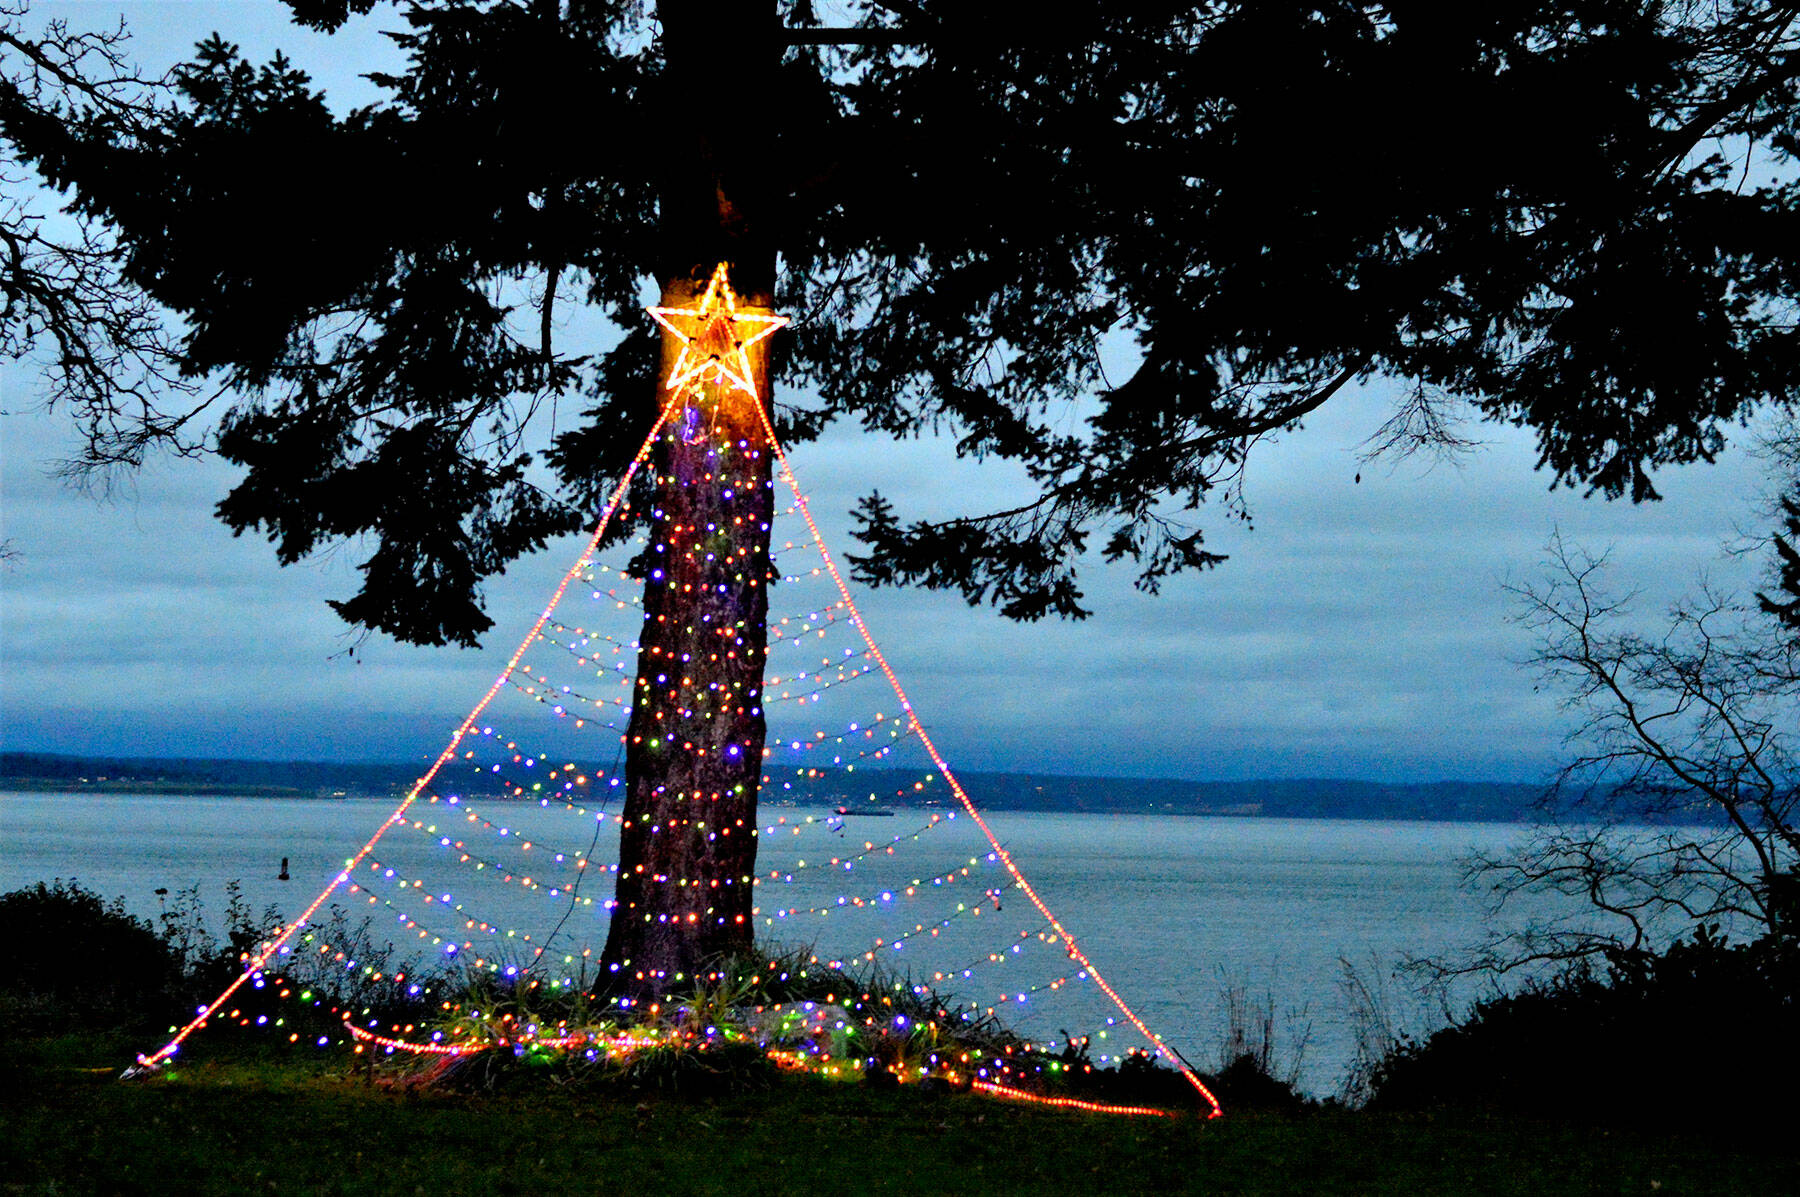 The neighbors near Chetzemoka Park in Port Townsend collaborate to put up a public Christmas tree every year. Its lights are visible from Lawrence Street as one approaches Jackson Street, while Admiralty Inlet provides the background. (Diane Urbani de la Paz/Peninsula Daily News)